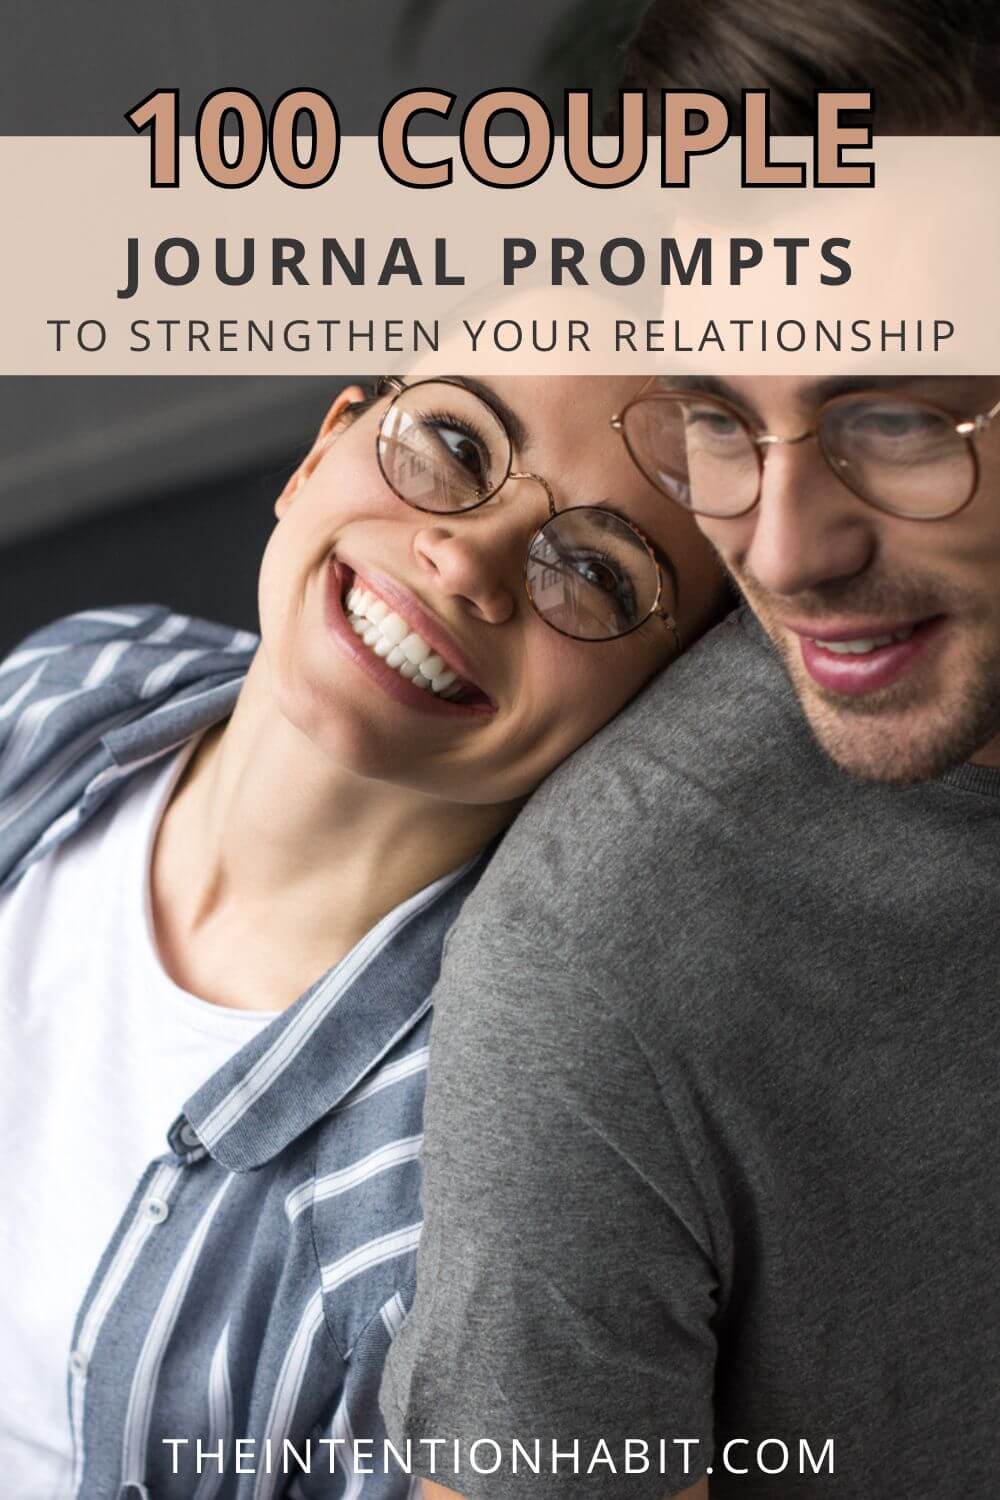 How To Write a Relationship Journal That Strengthens Your Bond and